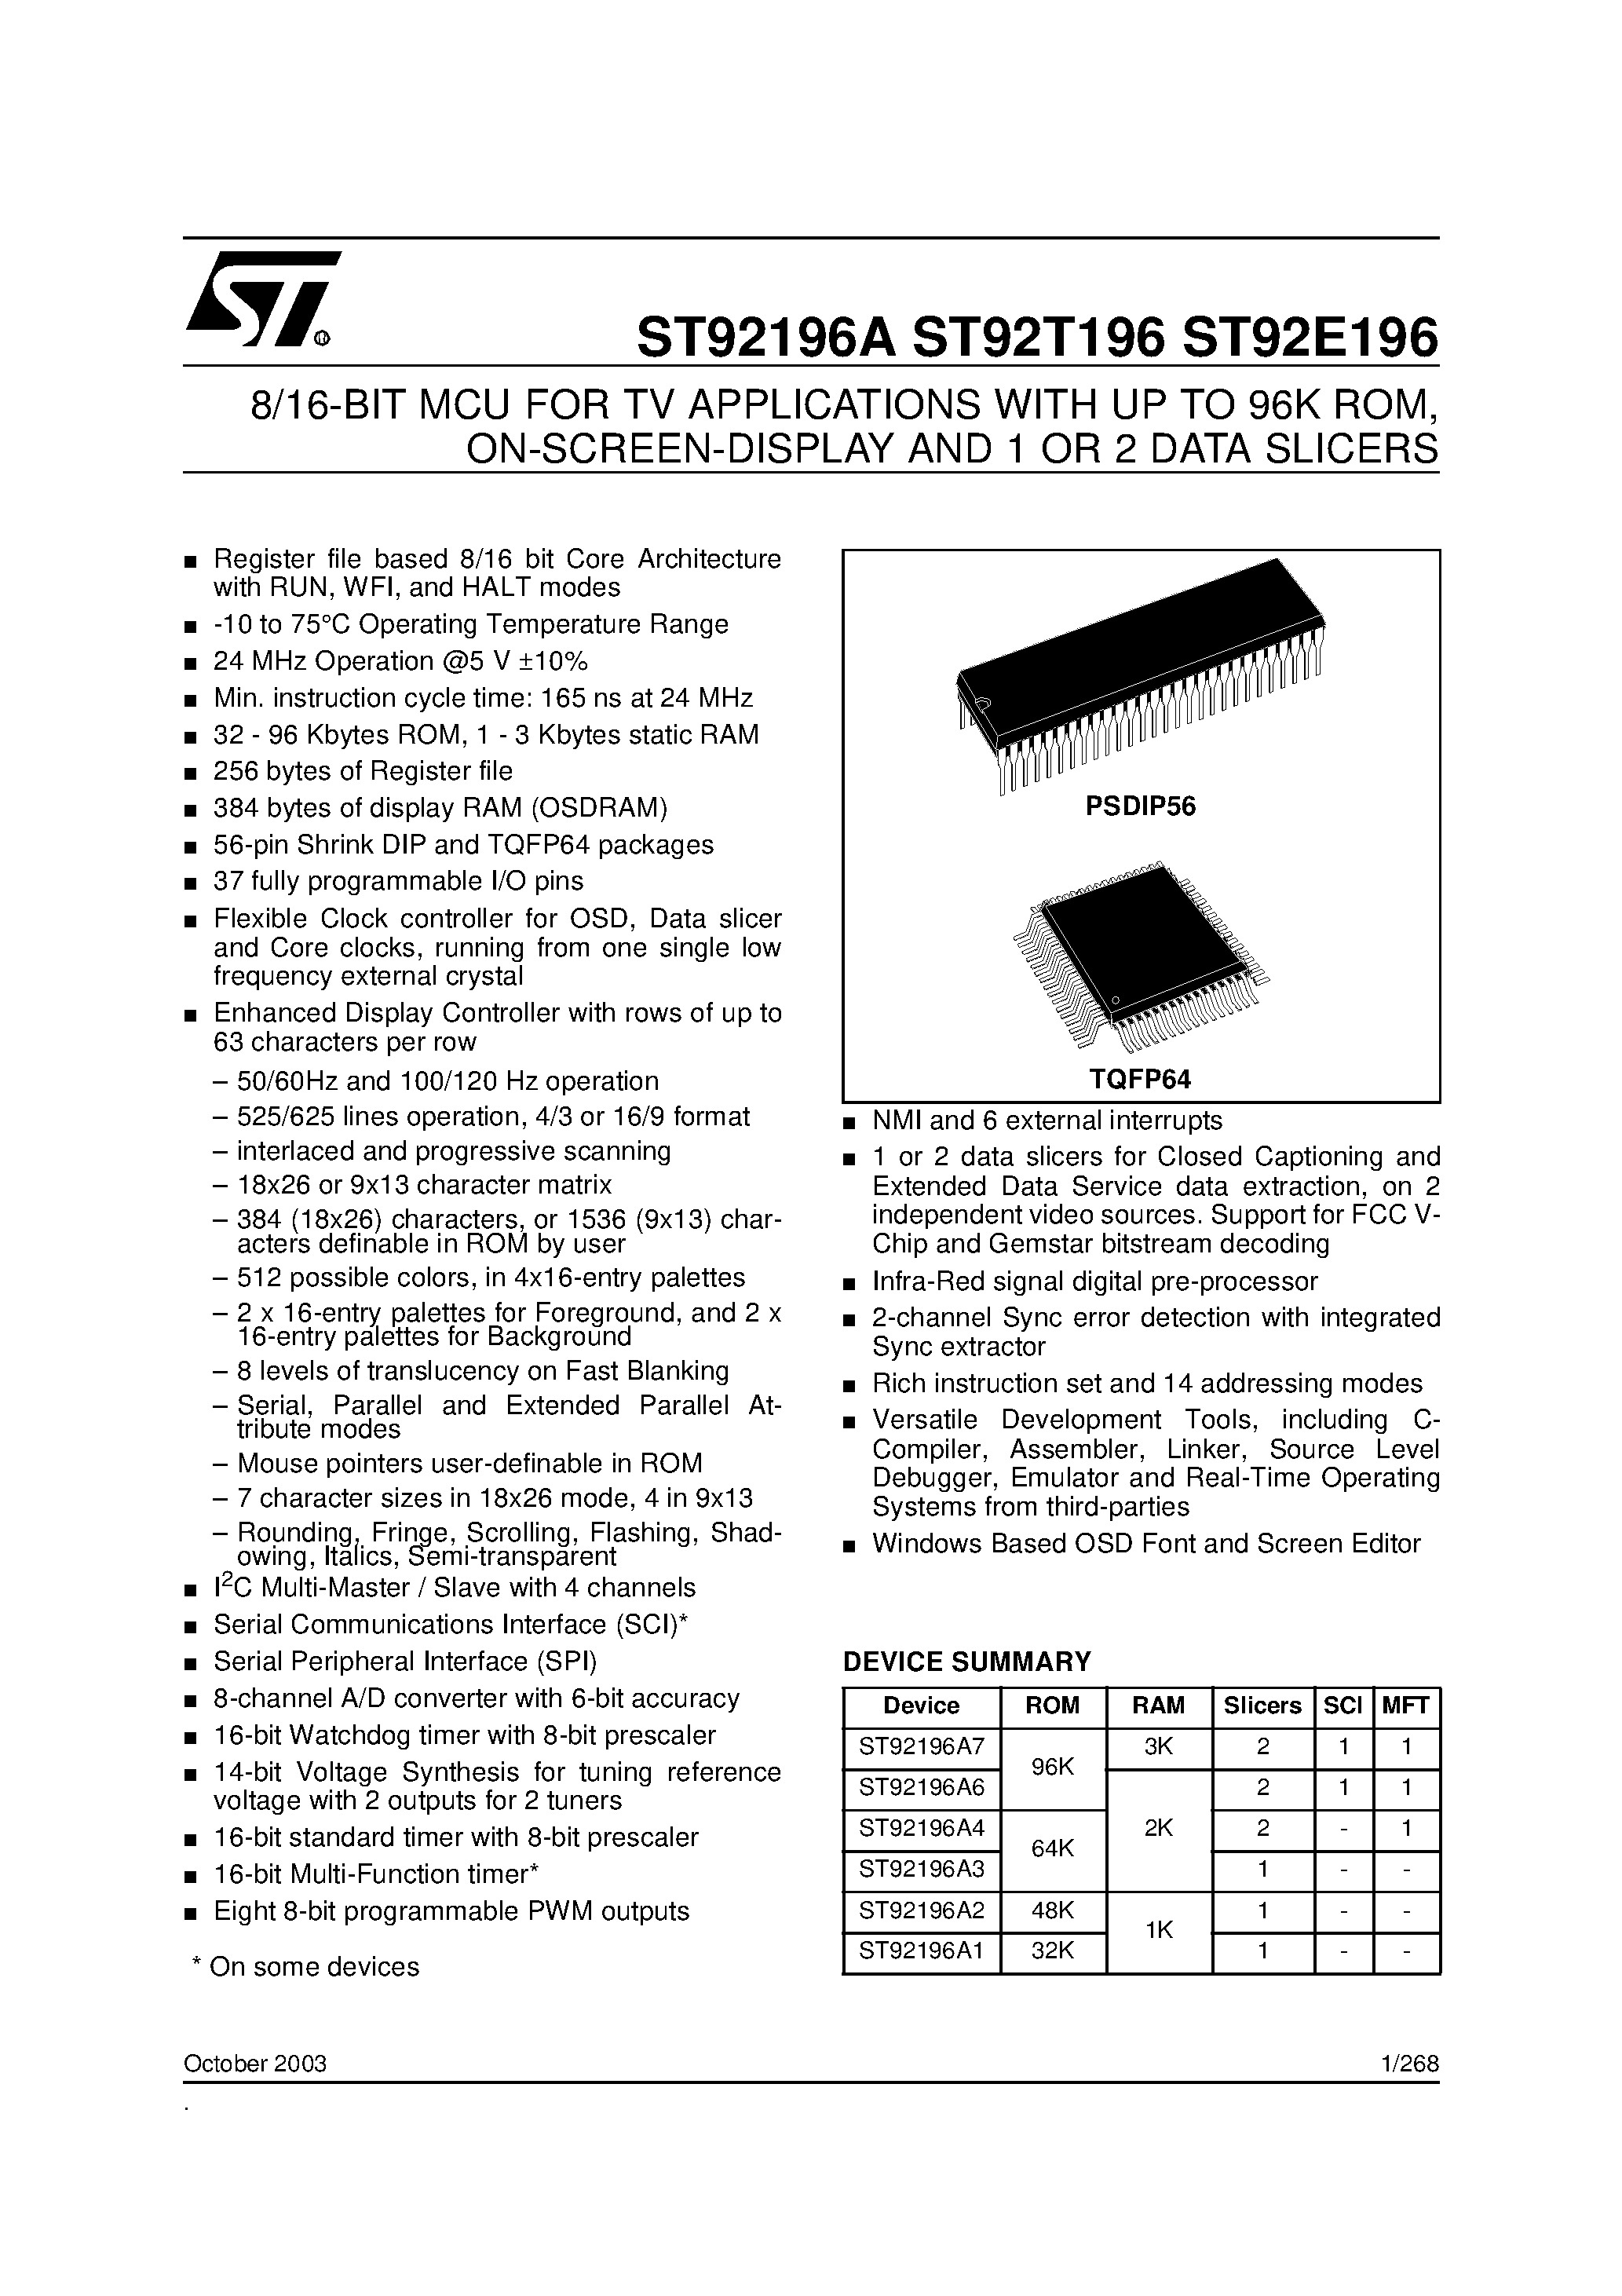 Datasheet ST92196A - 8/16-BIT MCU FOR TV APPLICATIONS WITH UP TO 96K ROM / ON-SCREEN-DISPLAY AND 1 OR 2 DATA SLICERS page 1